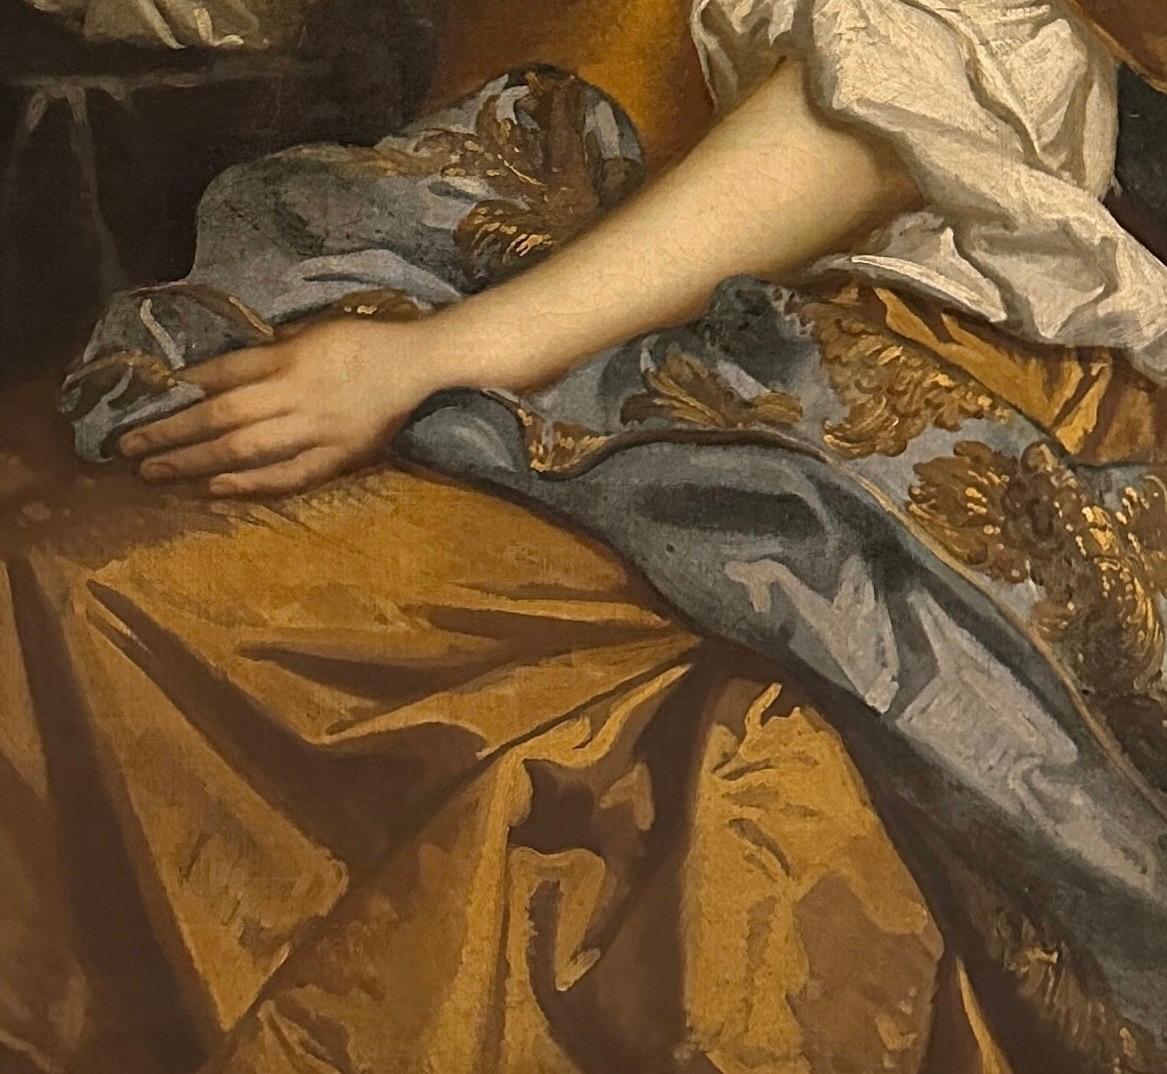 17th century portrait of a lady seated in an interior - Old Masters Painting by Studio of Peter Lely